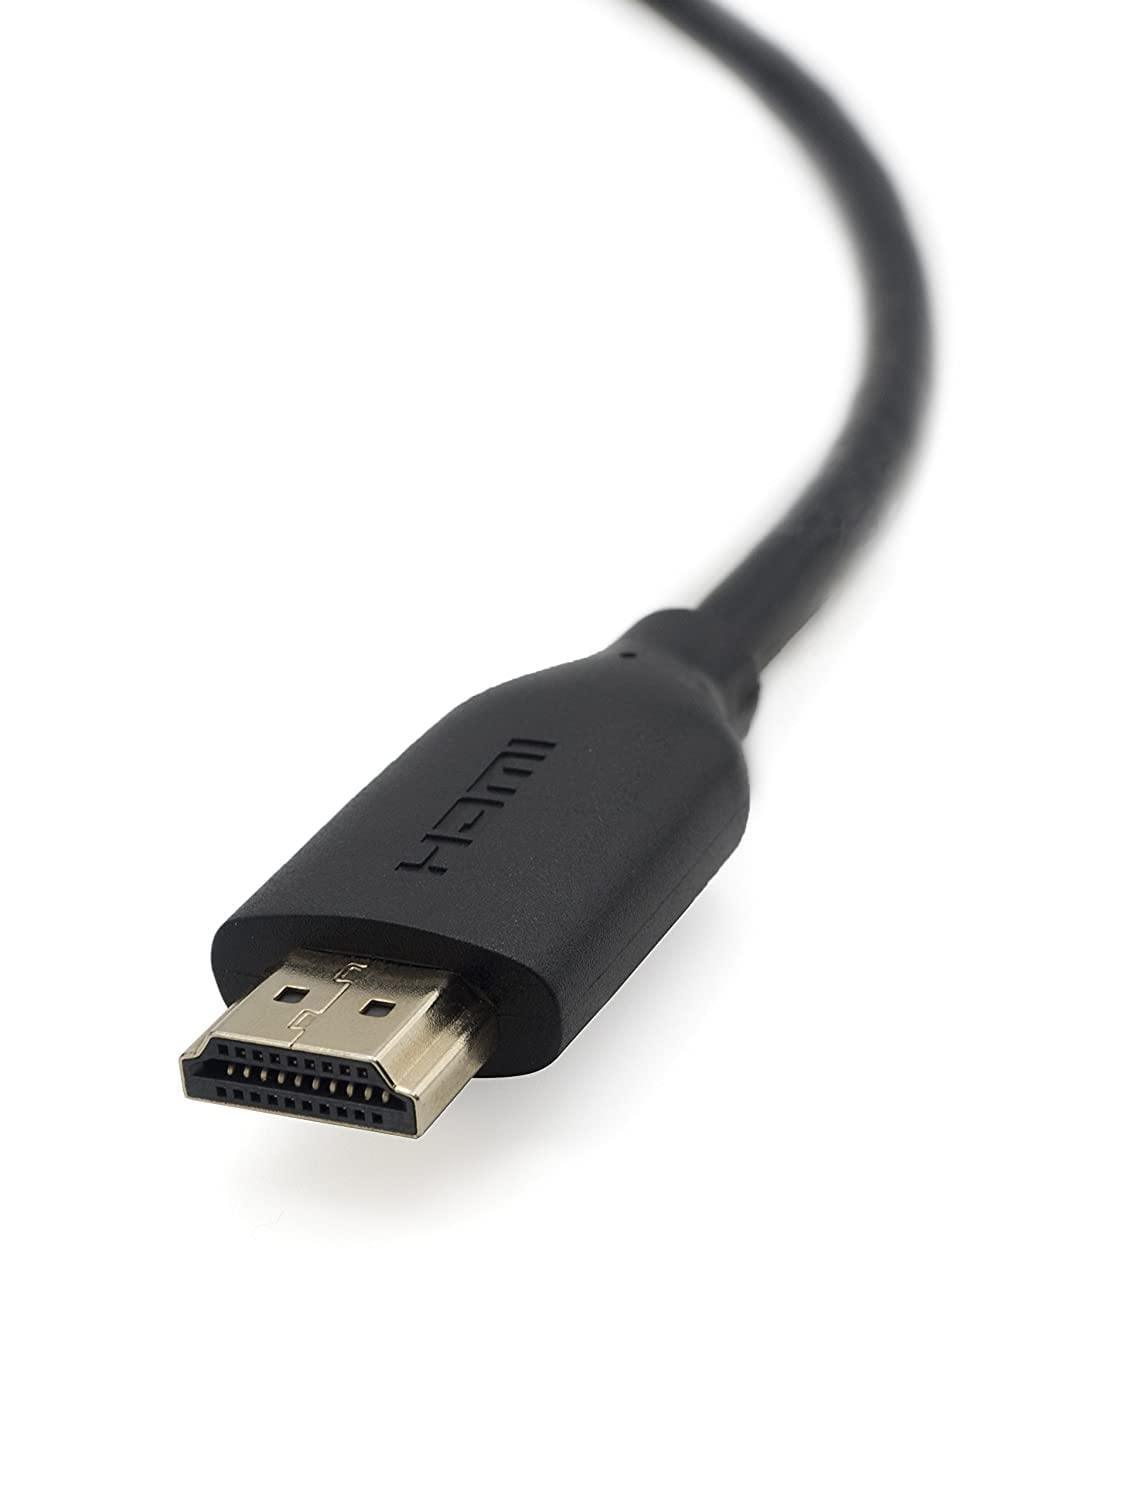 Belkin High Speed HDMI Cable Supports Ethernet 4K Gold Plated Audio Return Channel 2 meter-Cables-dealsplant